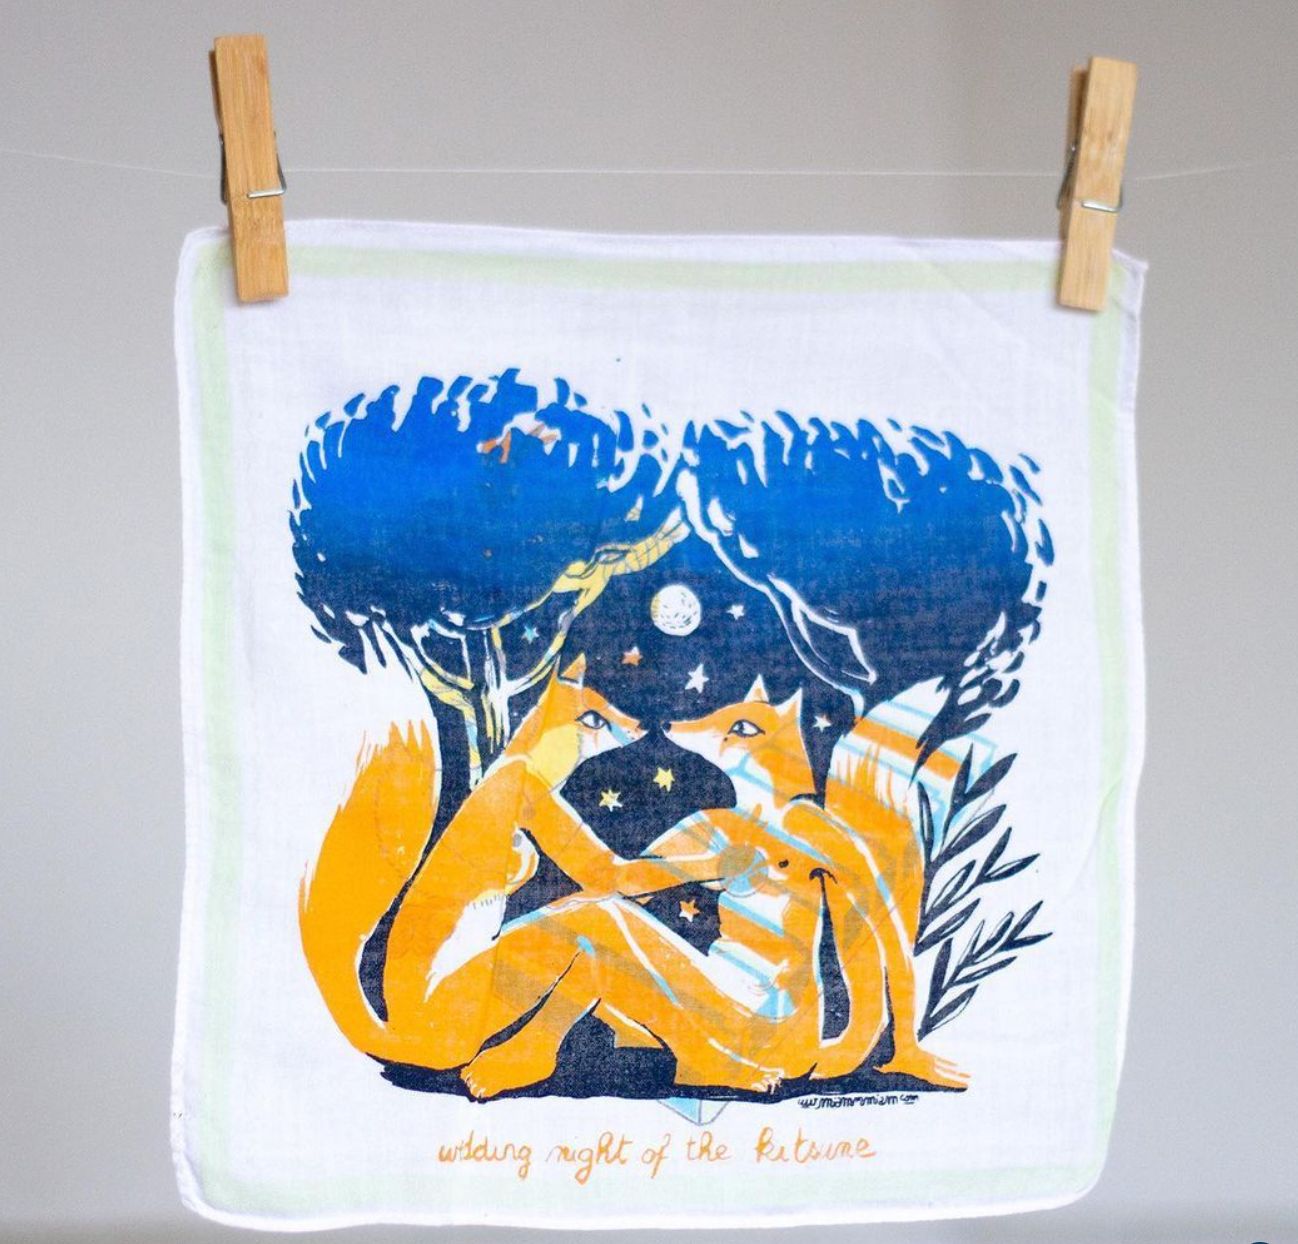 "Screen Print Your Own Textile Designs" Workshop with Julie in Berlin, Germany